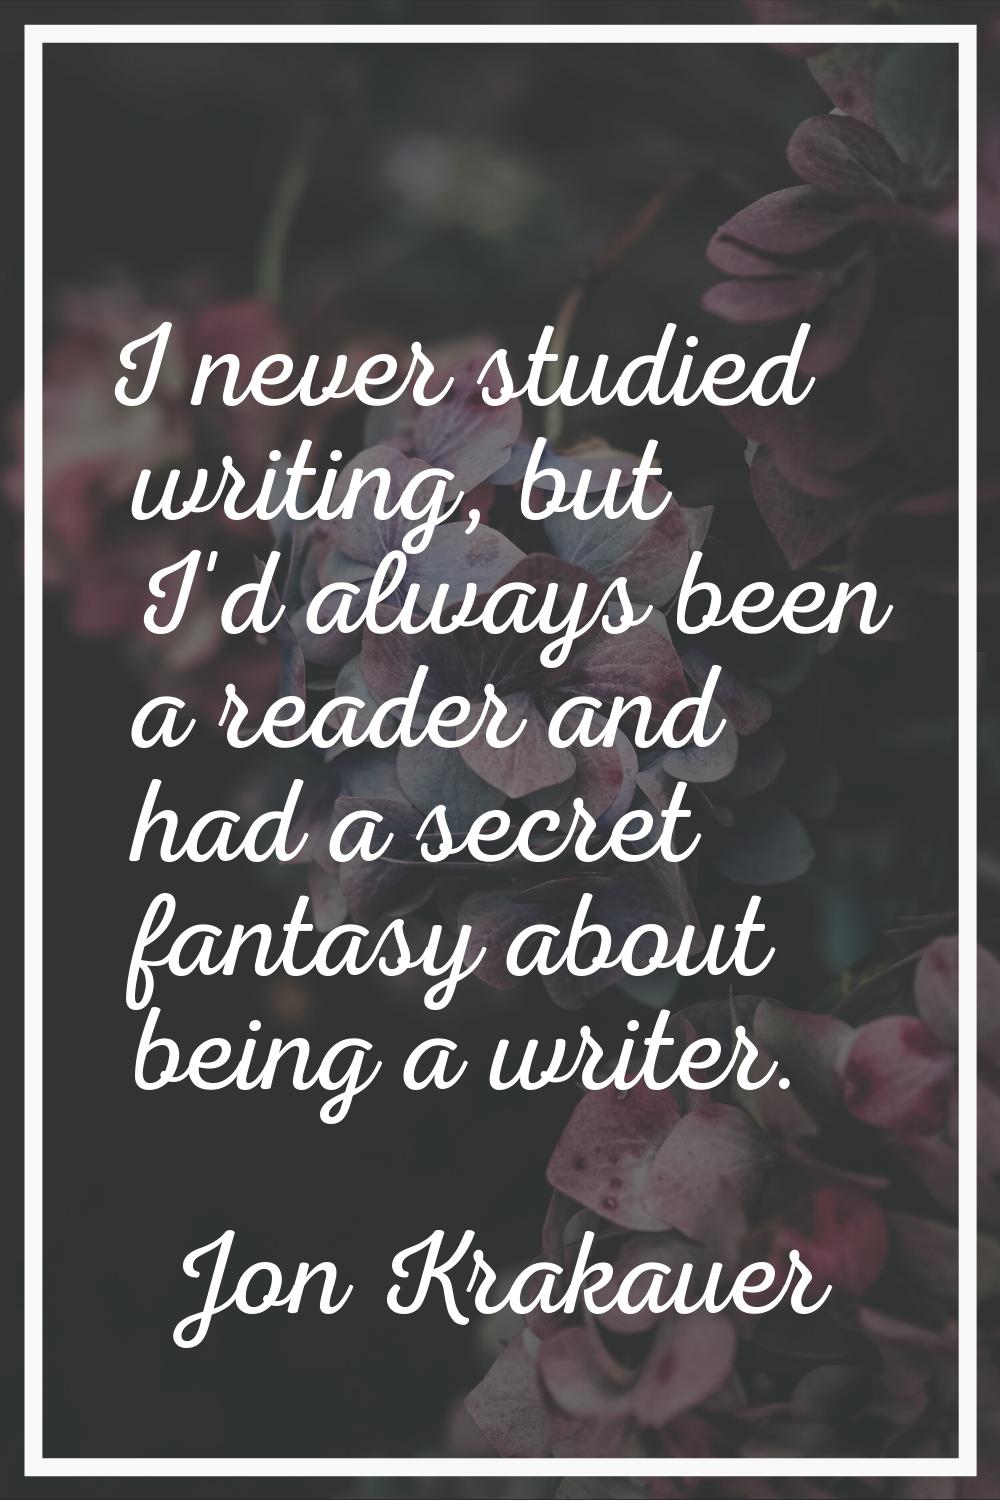 I never studied writing, but I'd always been a reader and had a secret fantasy about being a writer